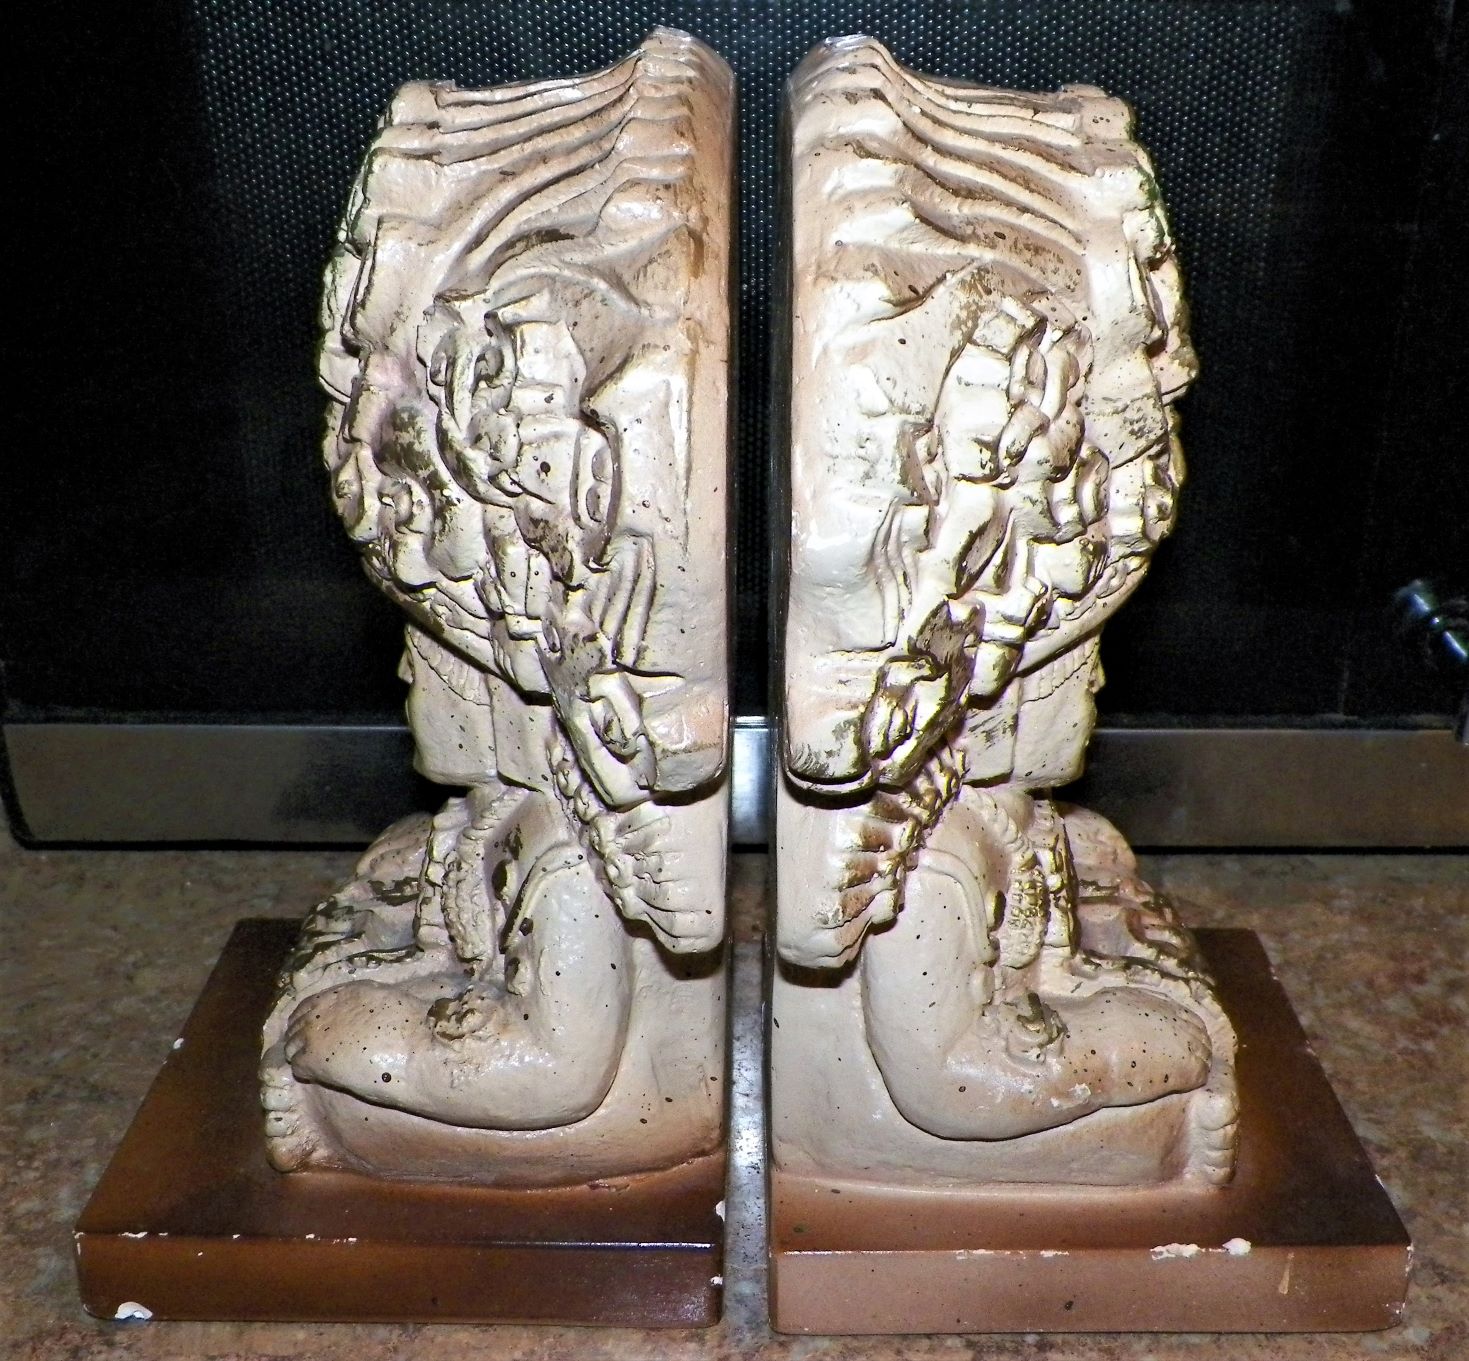 COLLECTIBLE BOOKENDS AZTEC MEXICAN MAYAN PLASTER 2AA.JPG